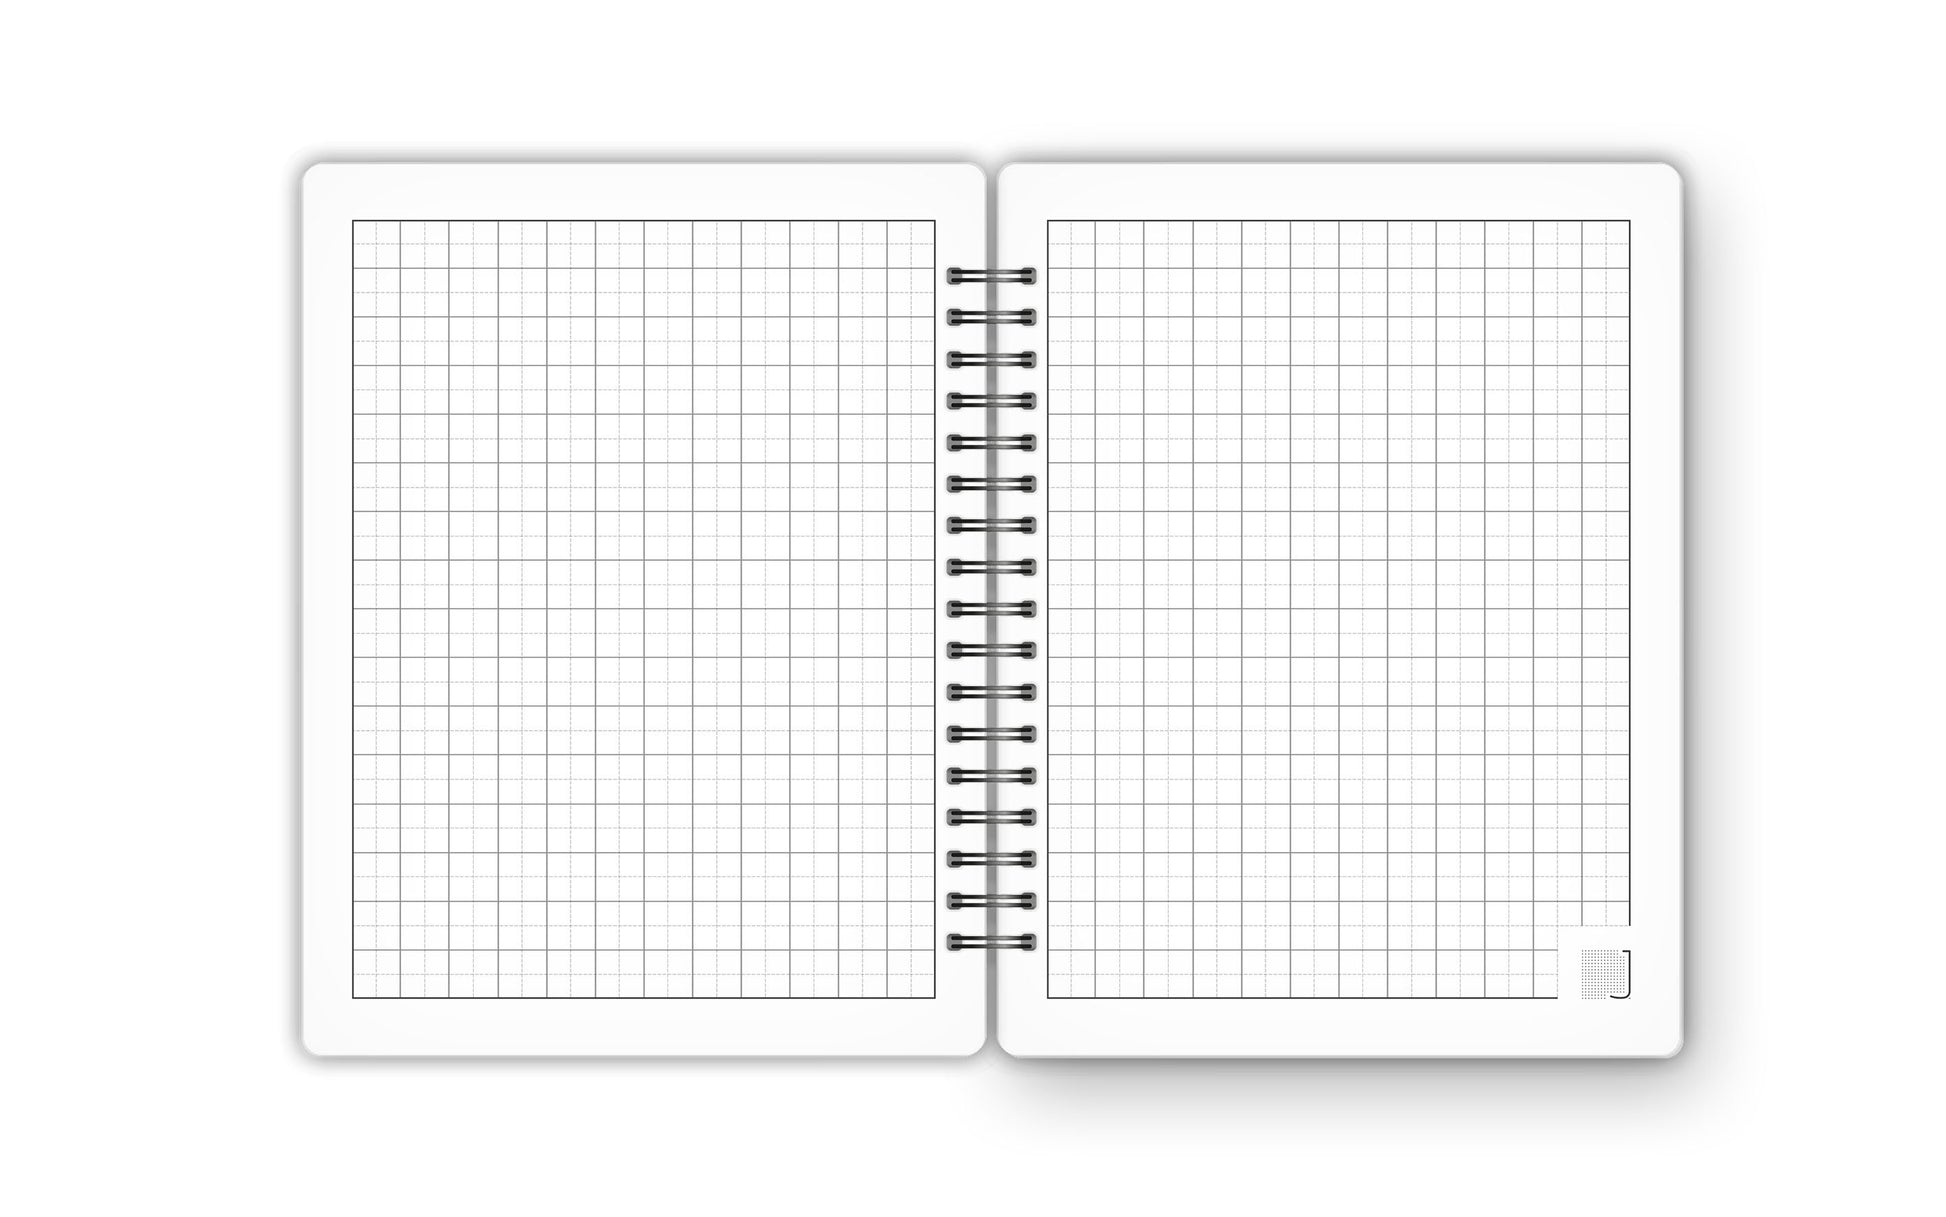 Square Grid - 18X14 cm - 75 Sheets | Minimal Leaf 02 - from Journals